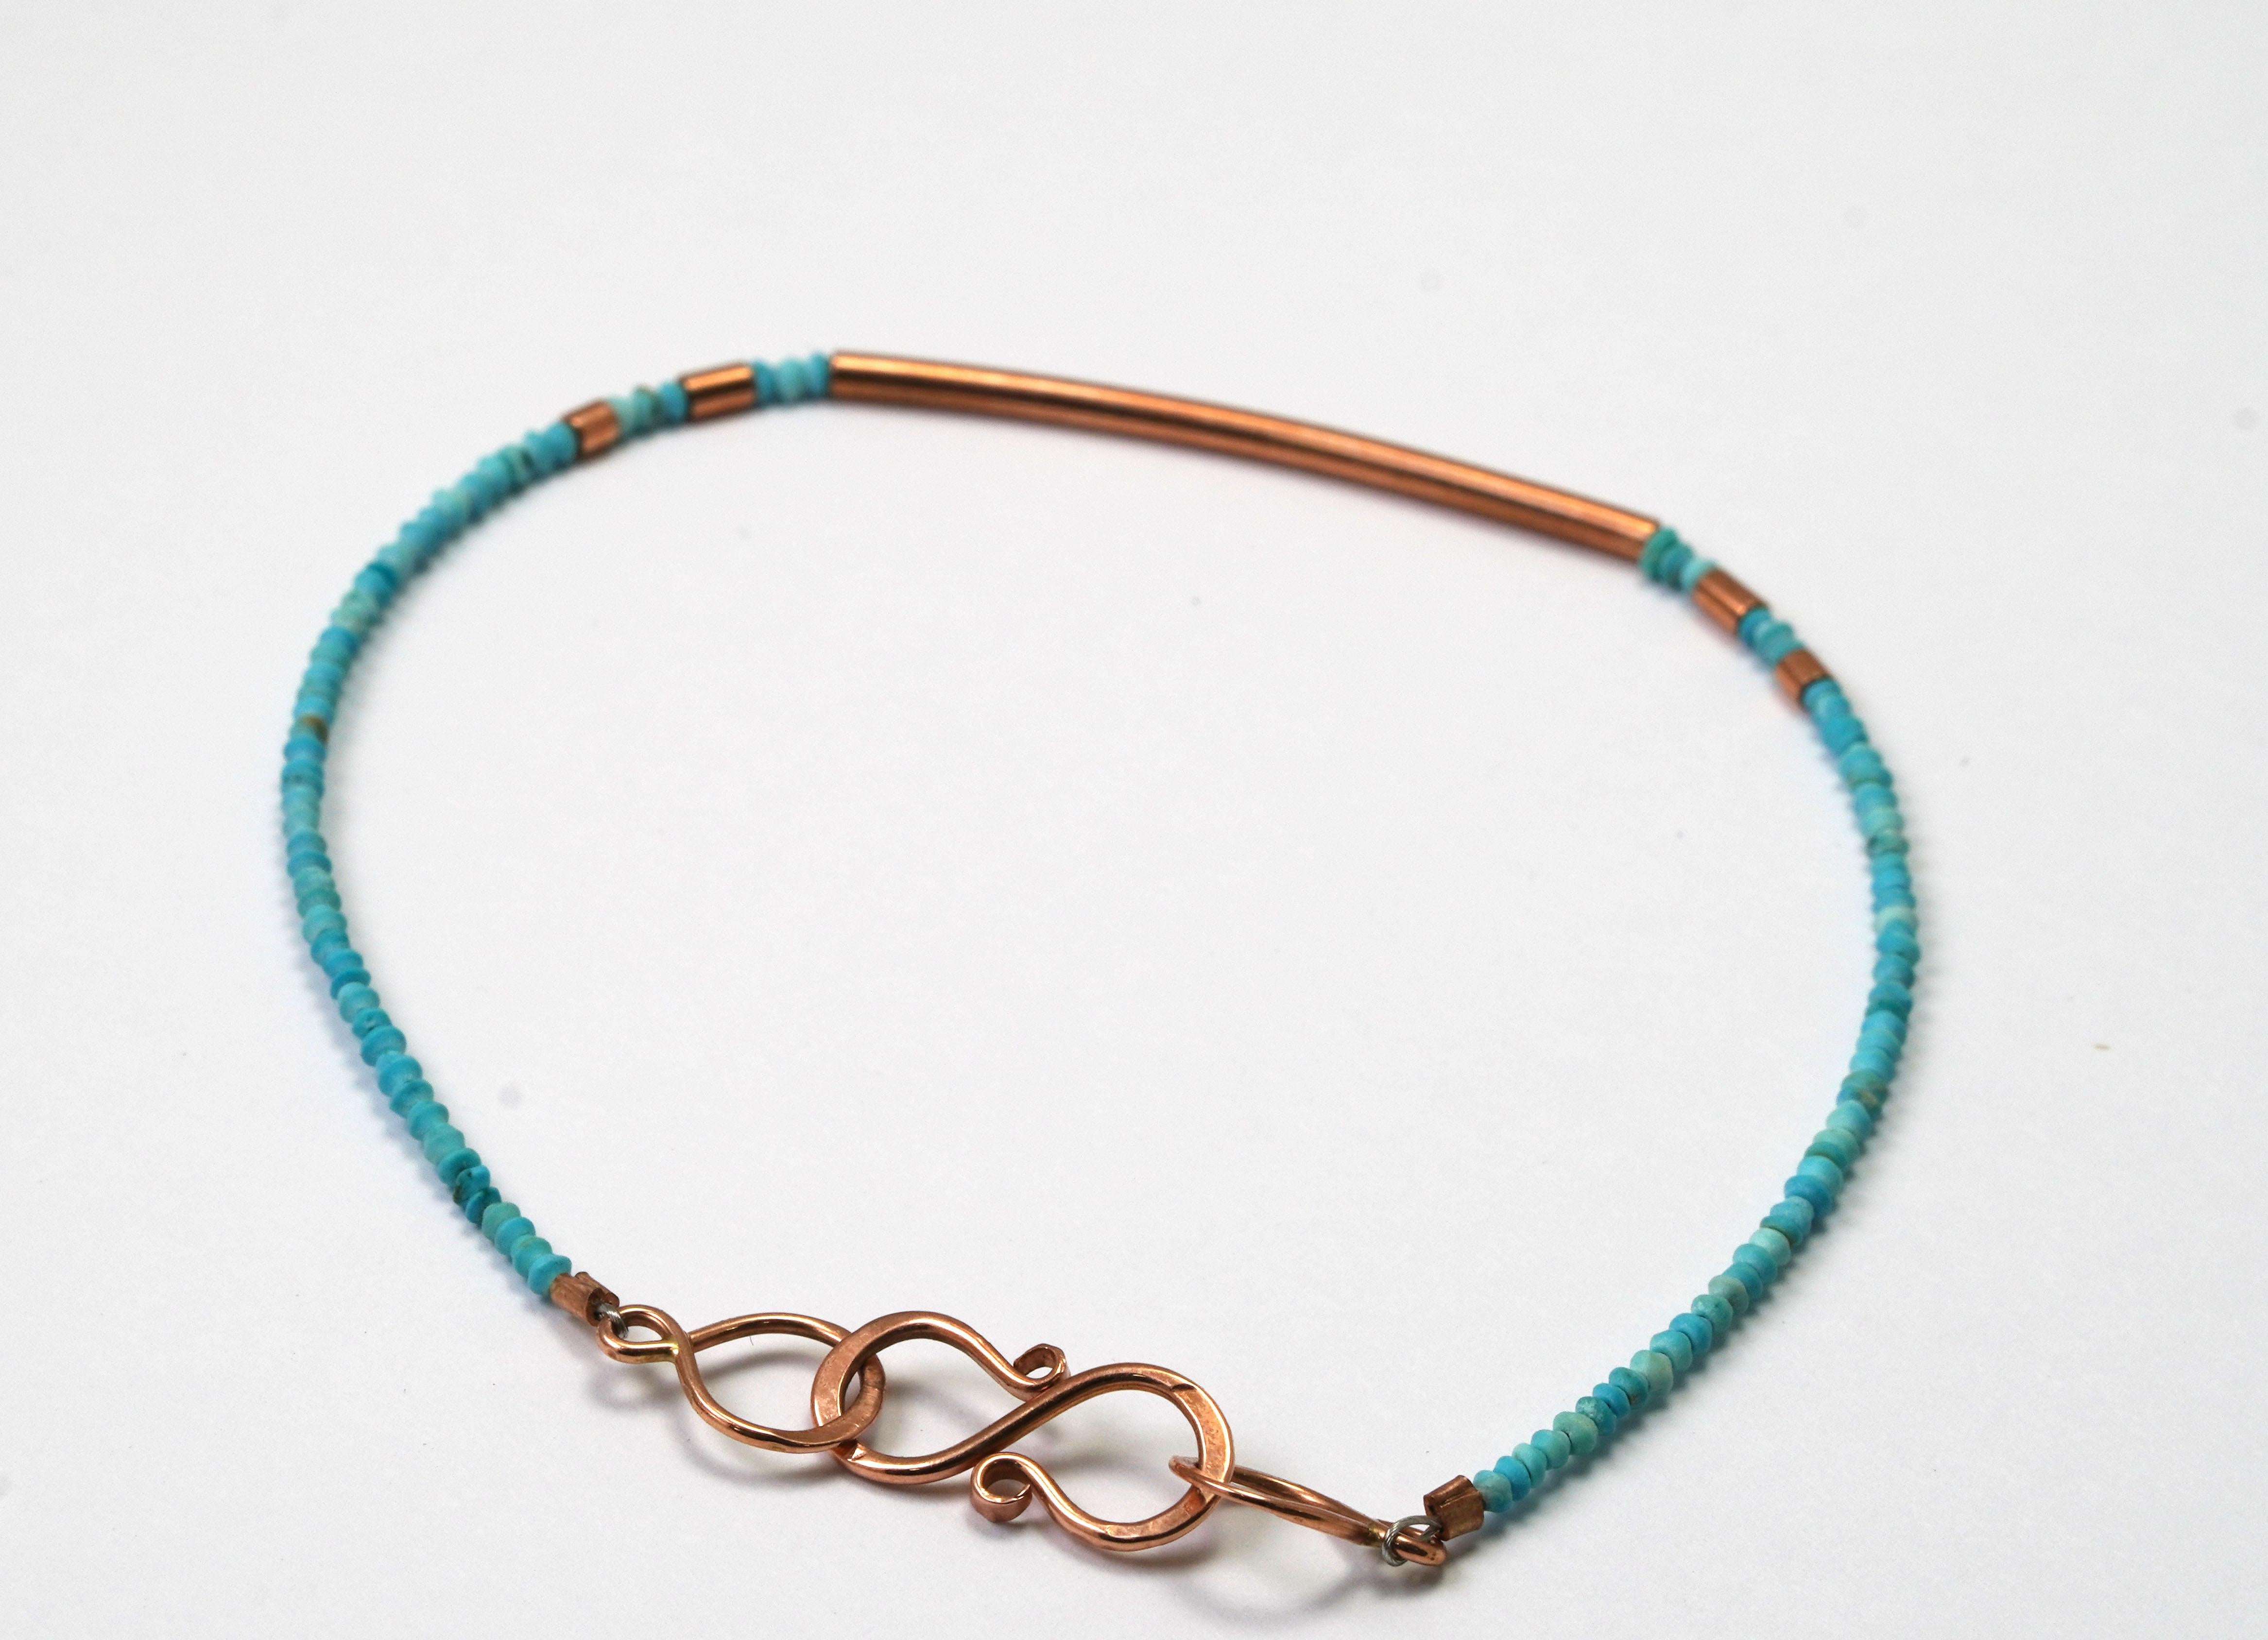 14 ct. Rose Gold Bracelet set with Turquoise.
Gold color: White and Rose
Dimensions: 18 cm (Length). 
Total weight: 1.62 grams 

Set with:
- Turquoise
Cut: Cabochon